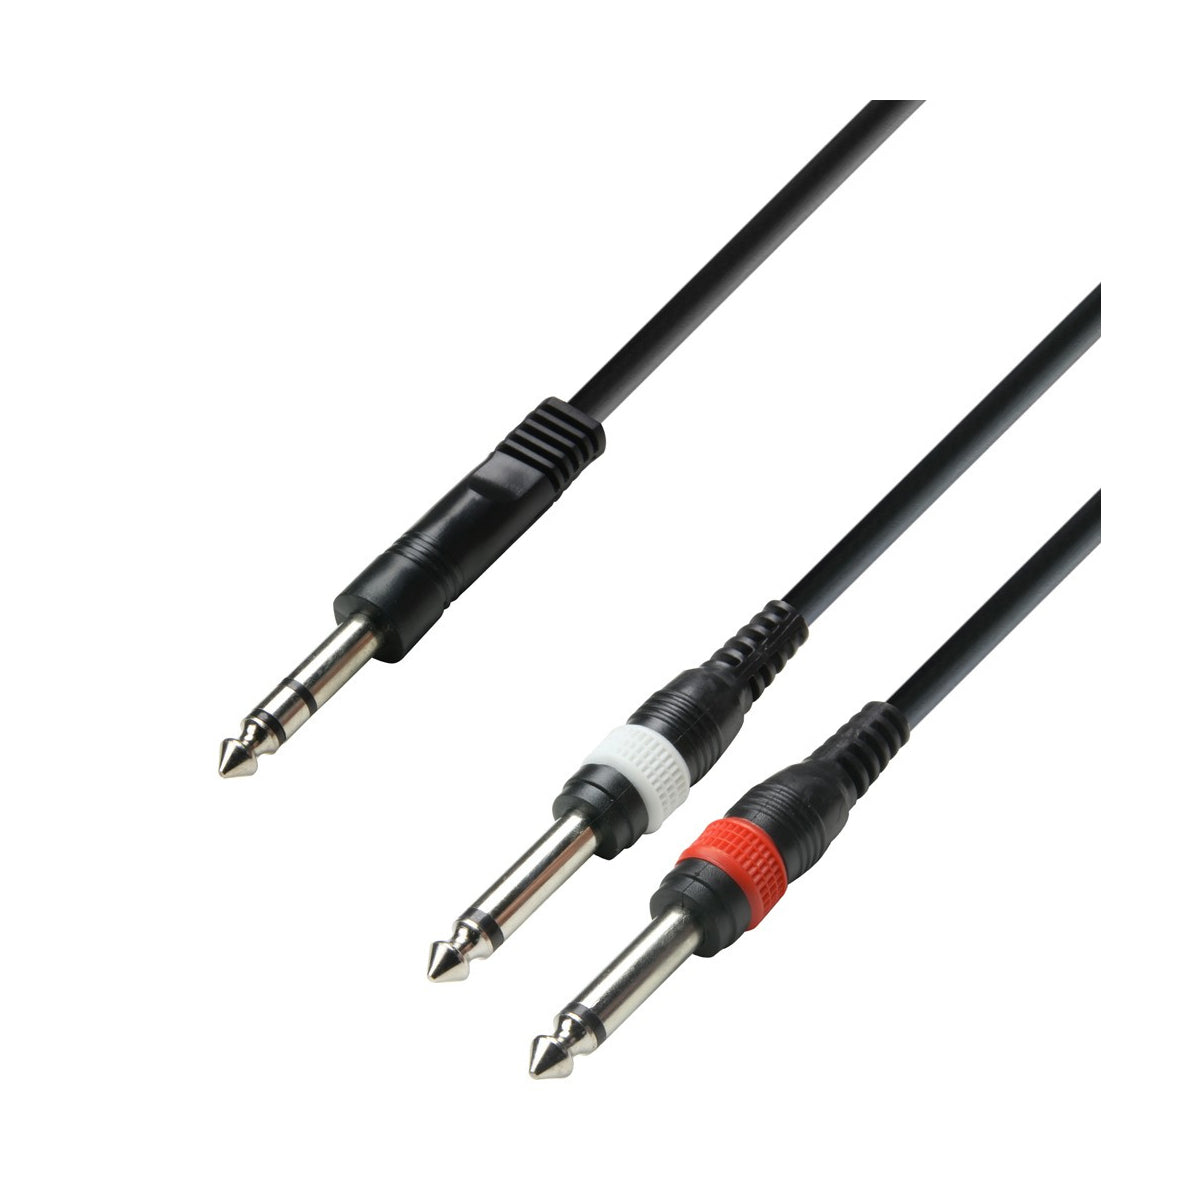 Adam Hall Cables K3 YVPP 0100 - Audio Cable 6.3mm Jack stereo to 2 x 6.3mm Jack mono 1m